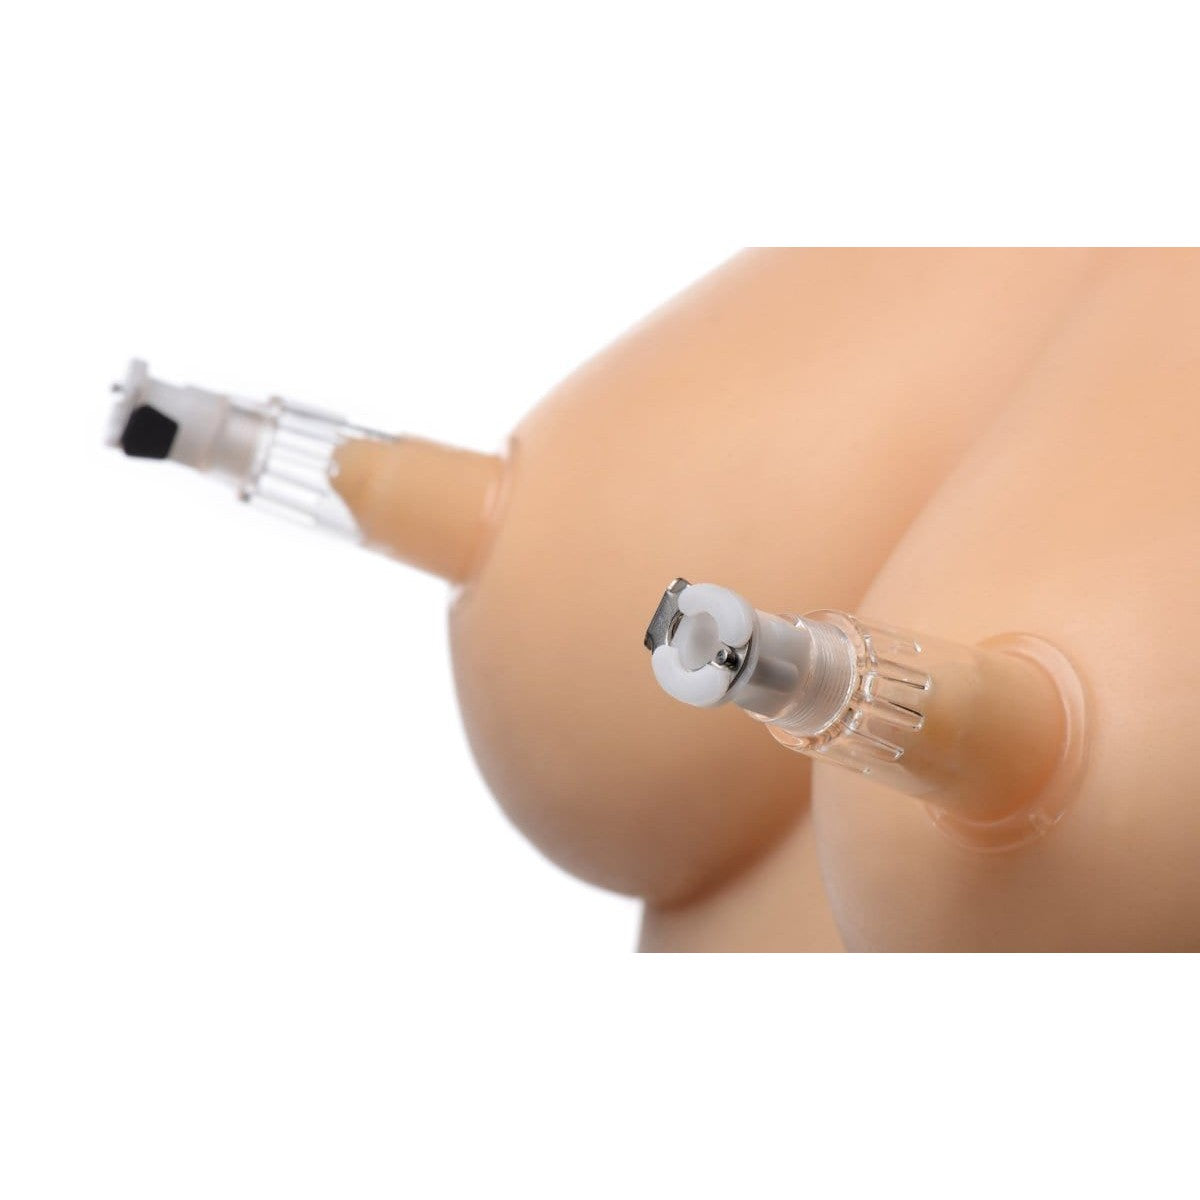 Master Series Breast Pump 3-way Suck Her Nipple And Clit Pump System at the Haus of Shag